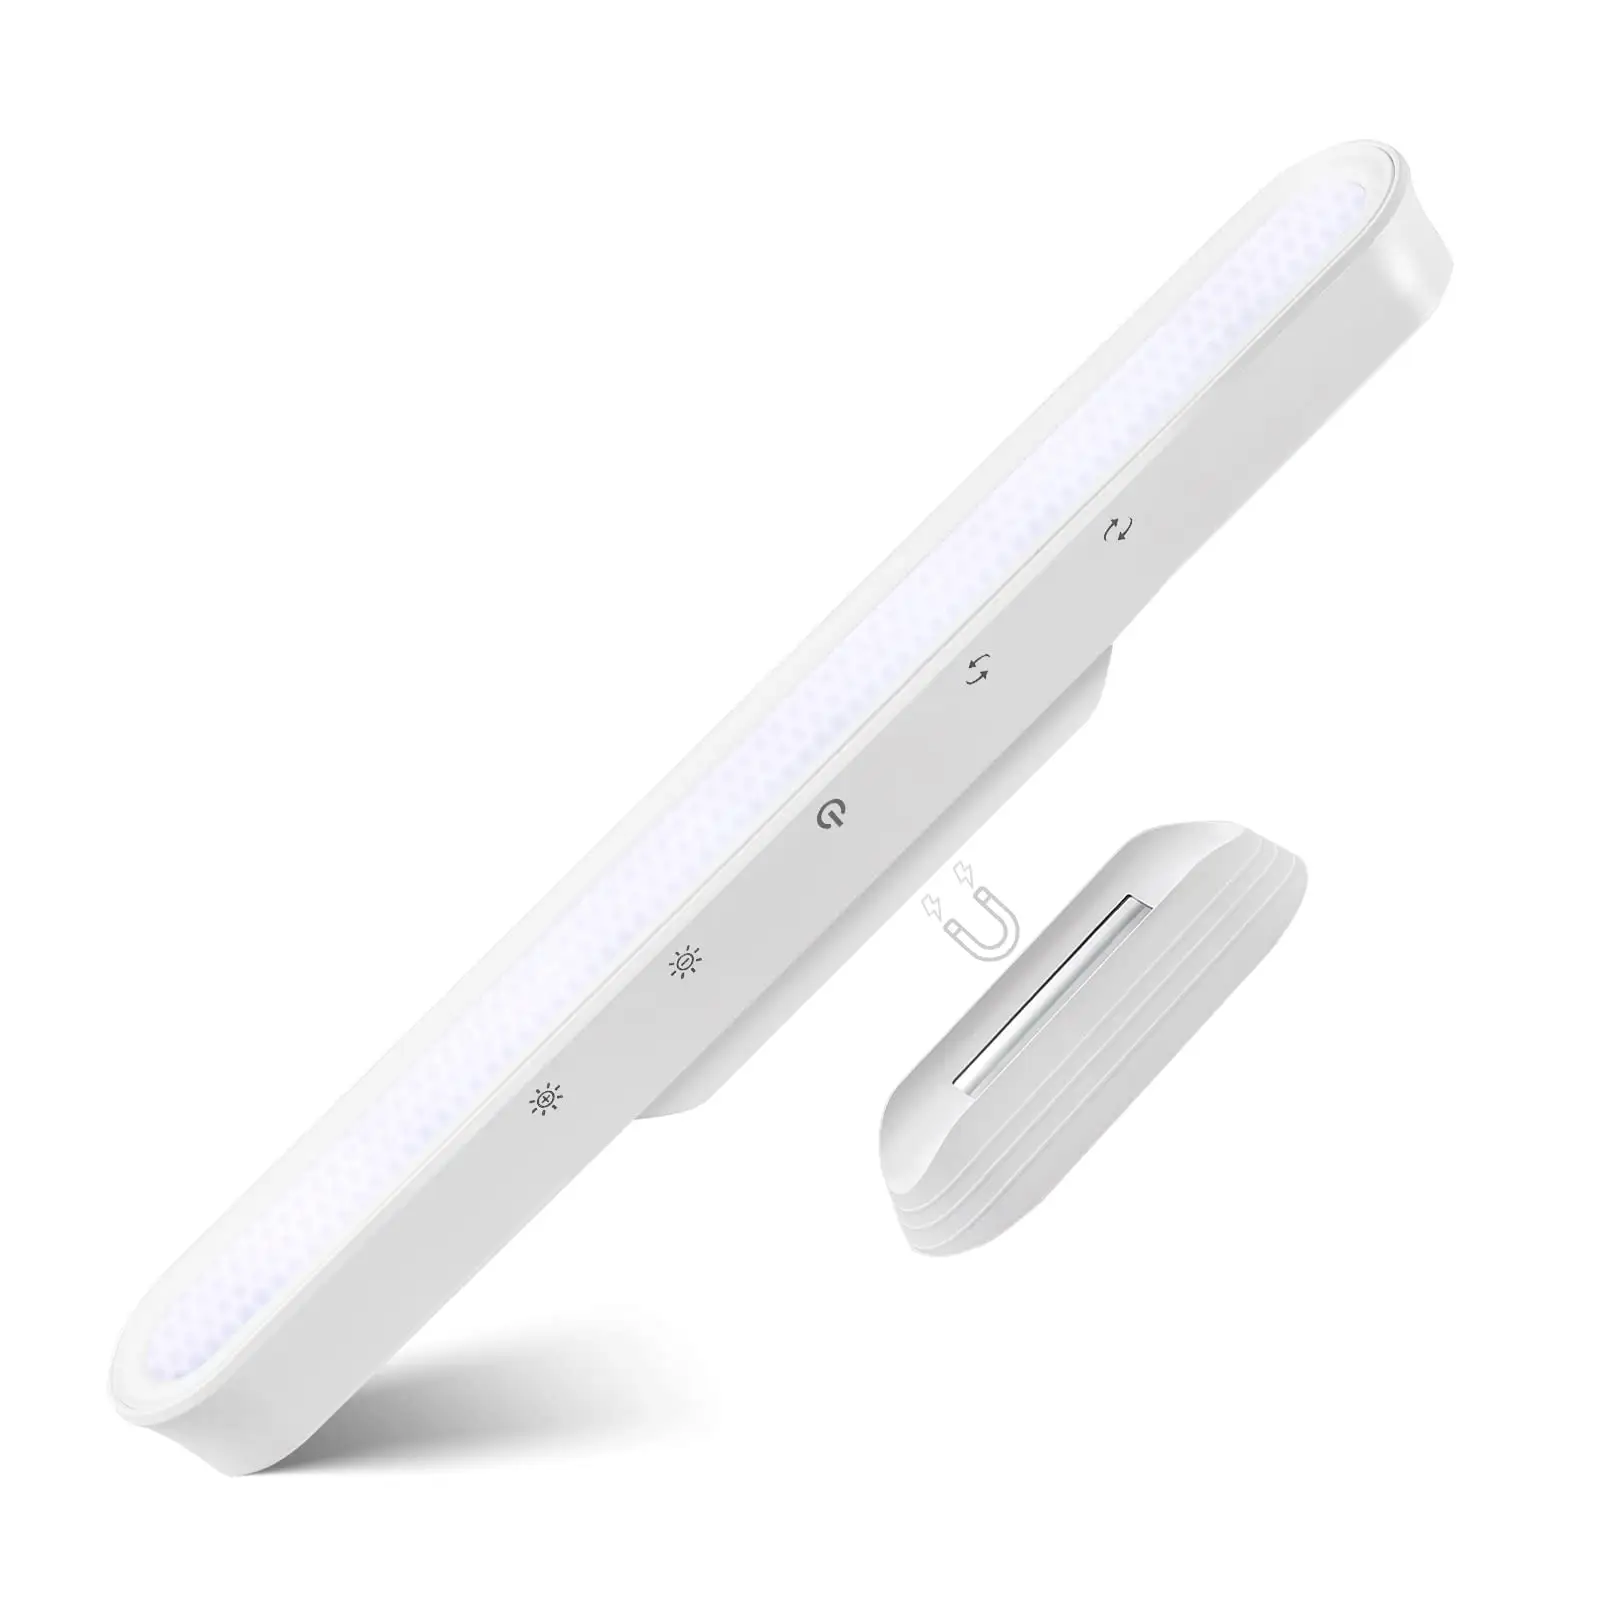 New bed reading light Eey-protect led reading lamp magnetic led wall reading light wall mounted reading lamp